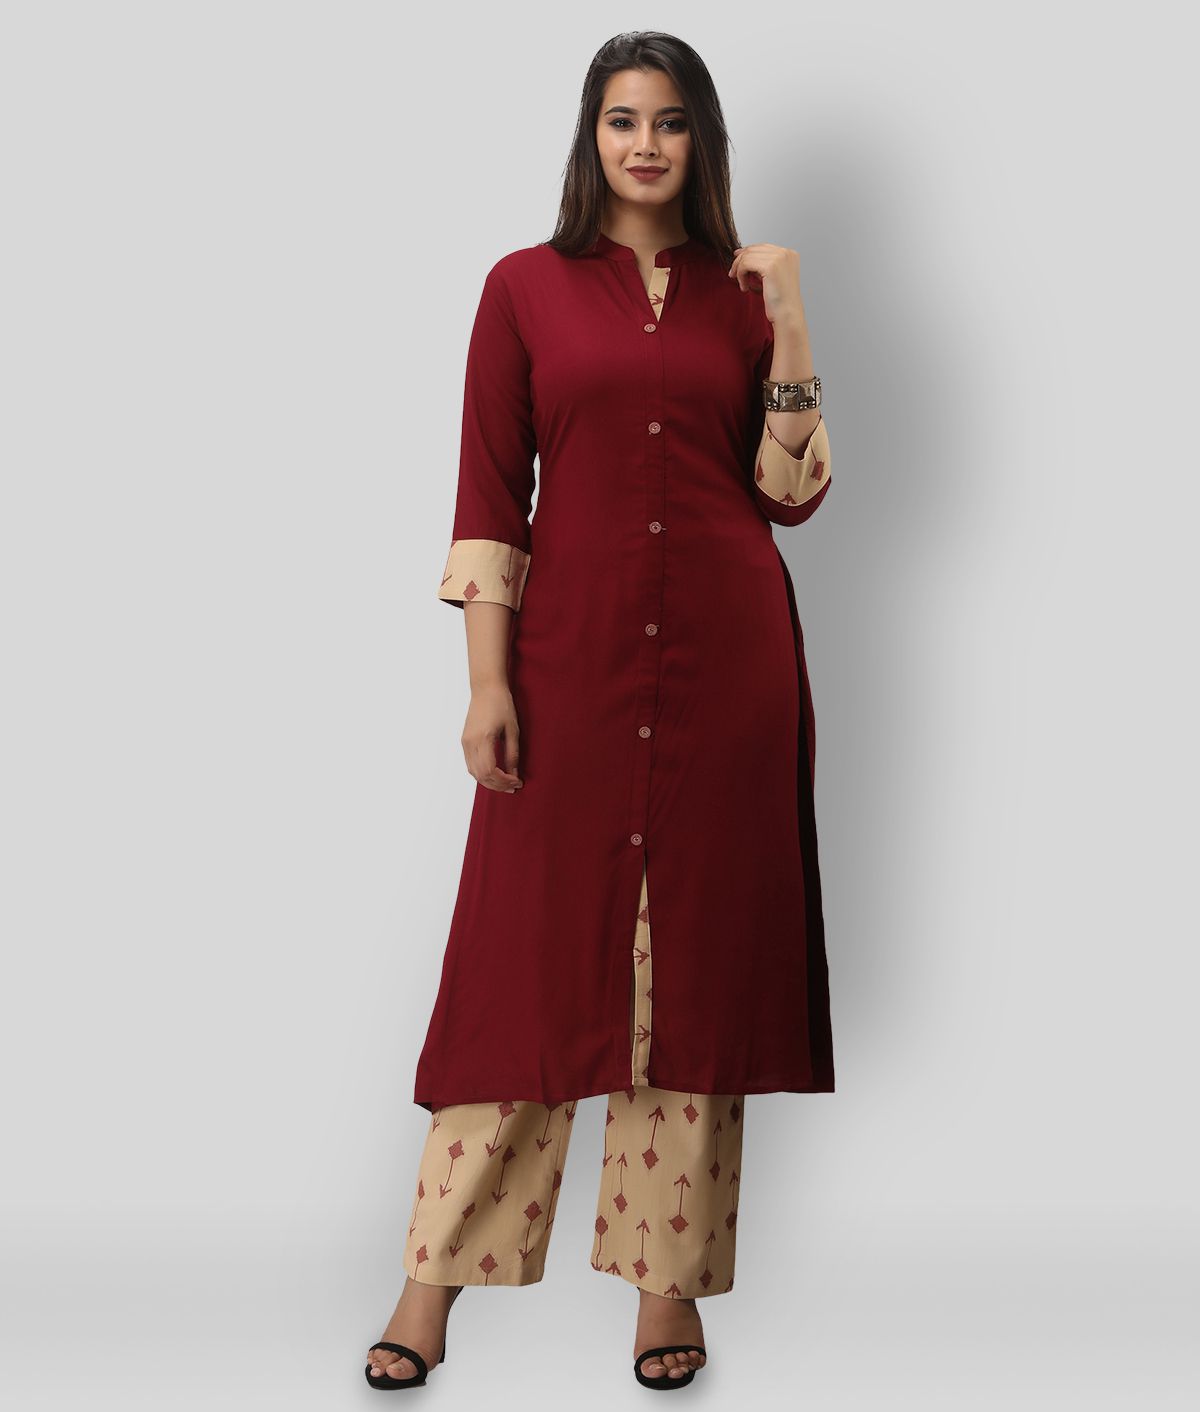 MAUKA - Maroon Front Slit Rayon Women's Stitched Salwar Suit ( Pack of 1 )